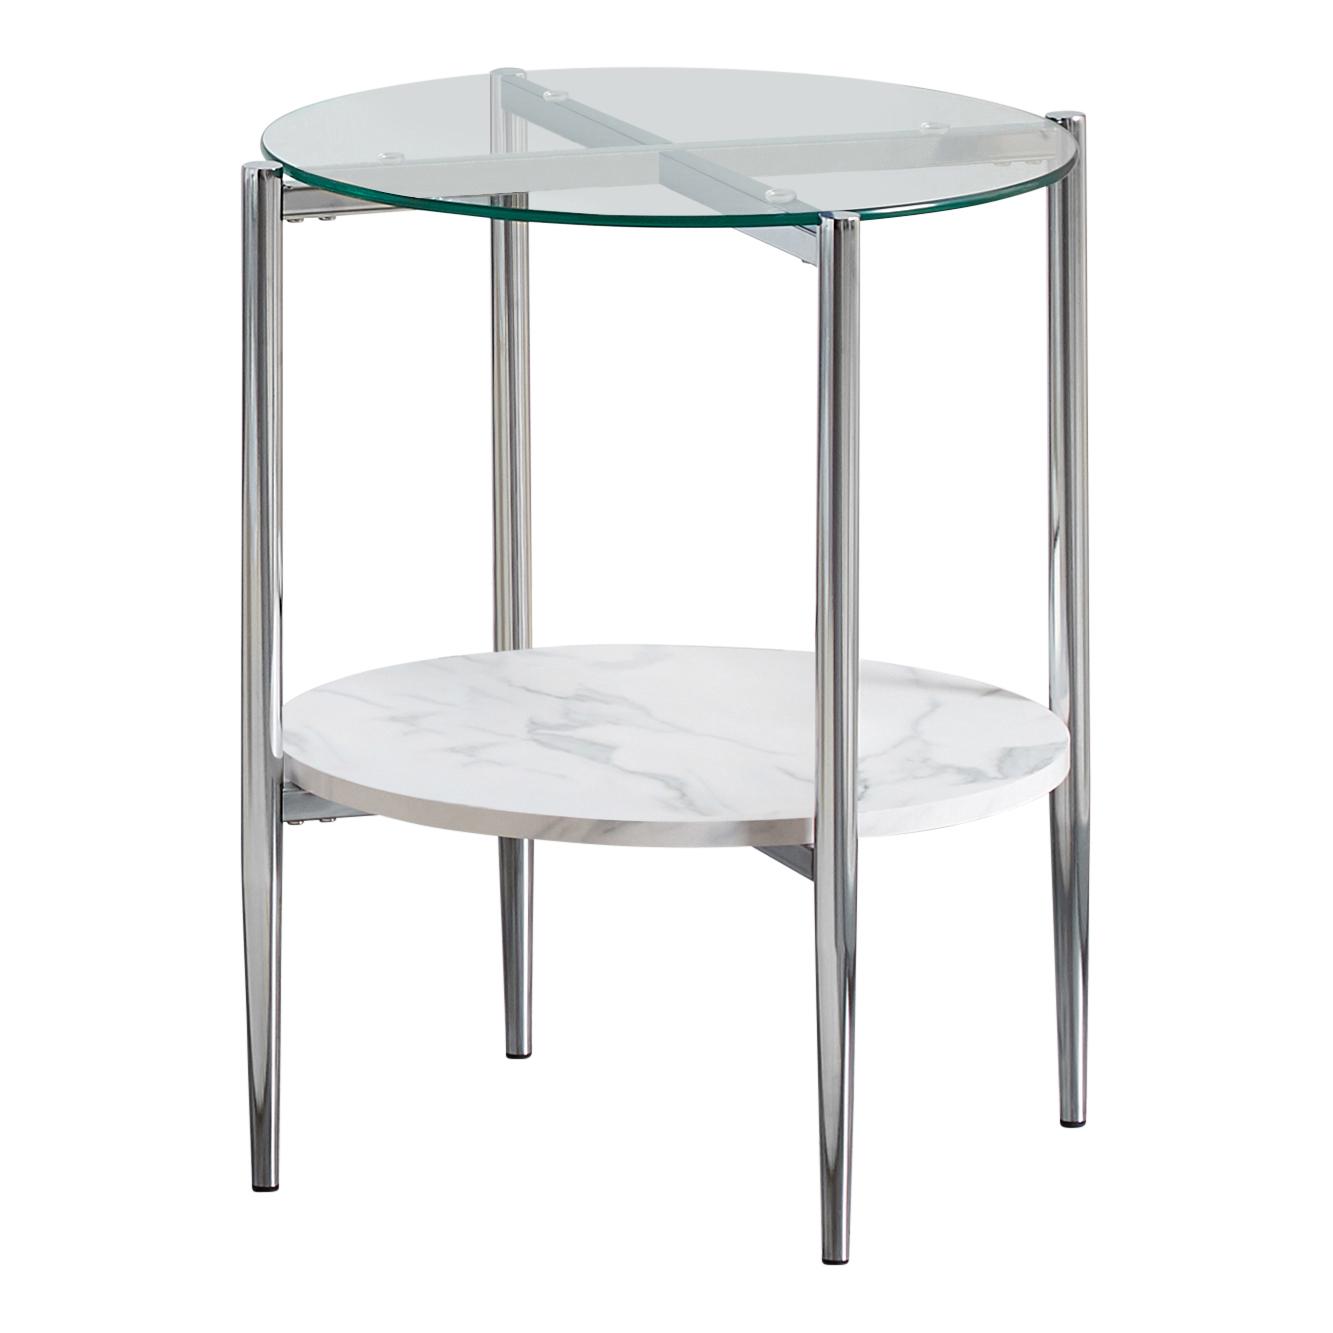 Contemporary End Table 723277 723277 in Chrome 